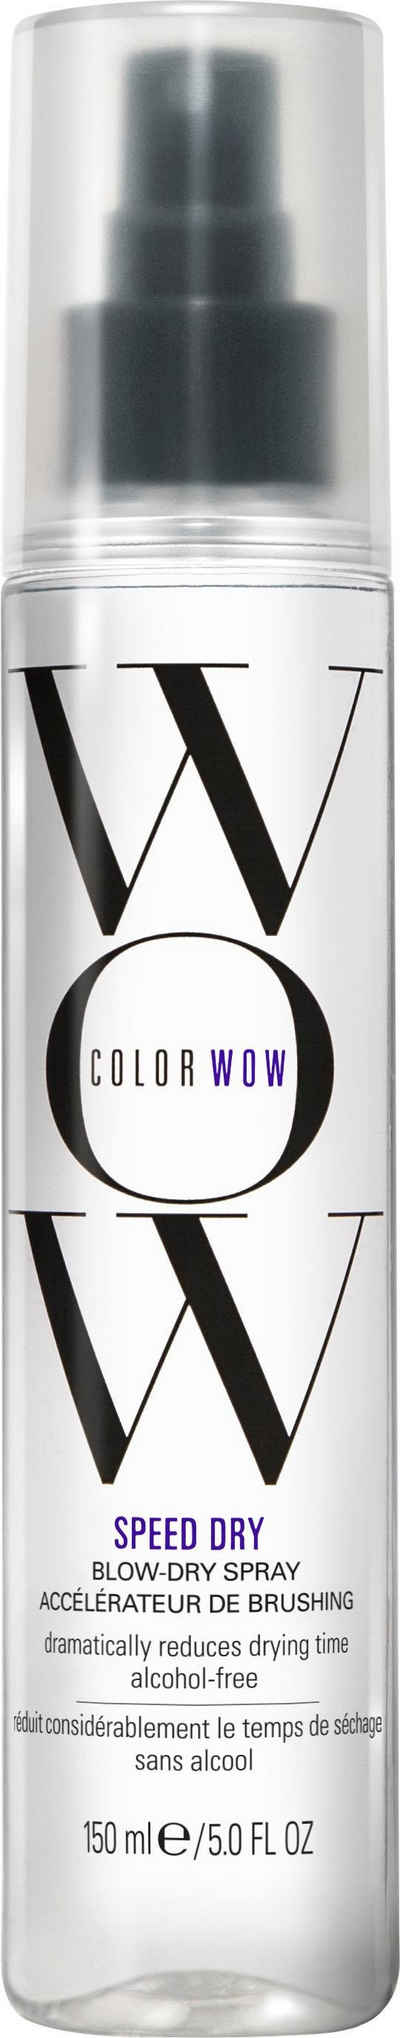 COLOR WOW Föhnlotion Speed Dry